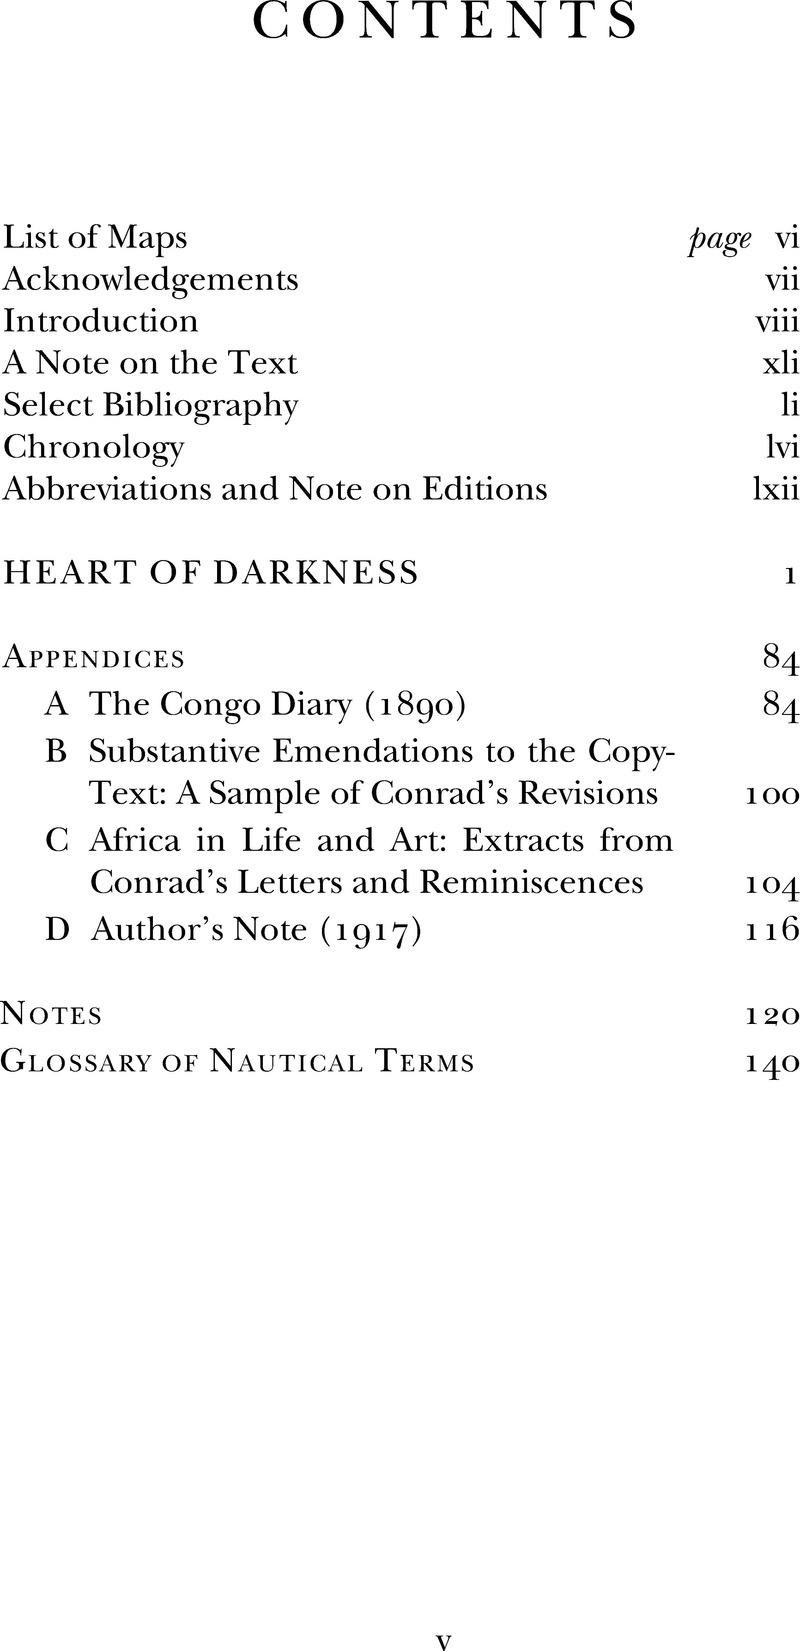 heart of darkness thesis pdf